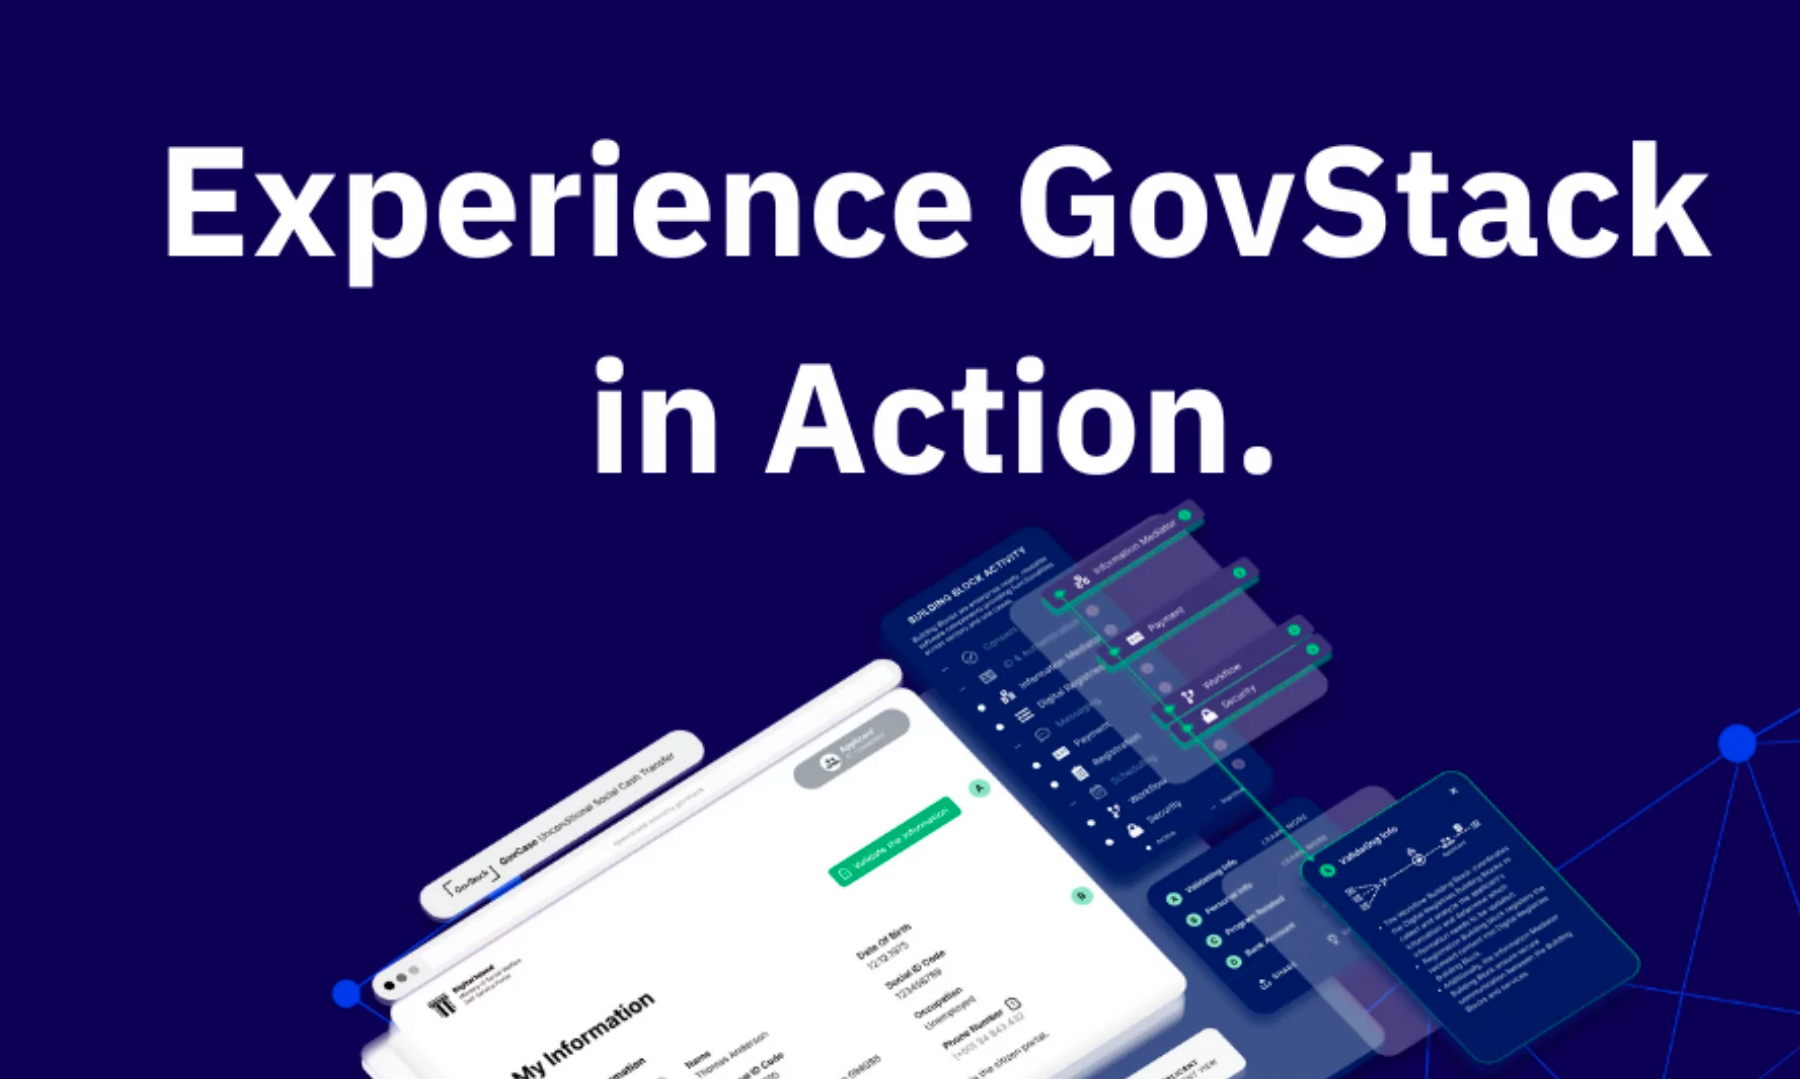 Experience GovStack in Action Through a Real-Life Simulation